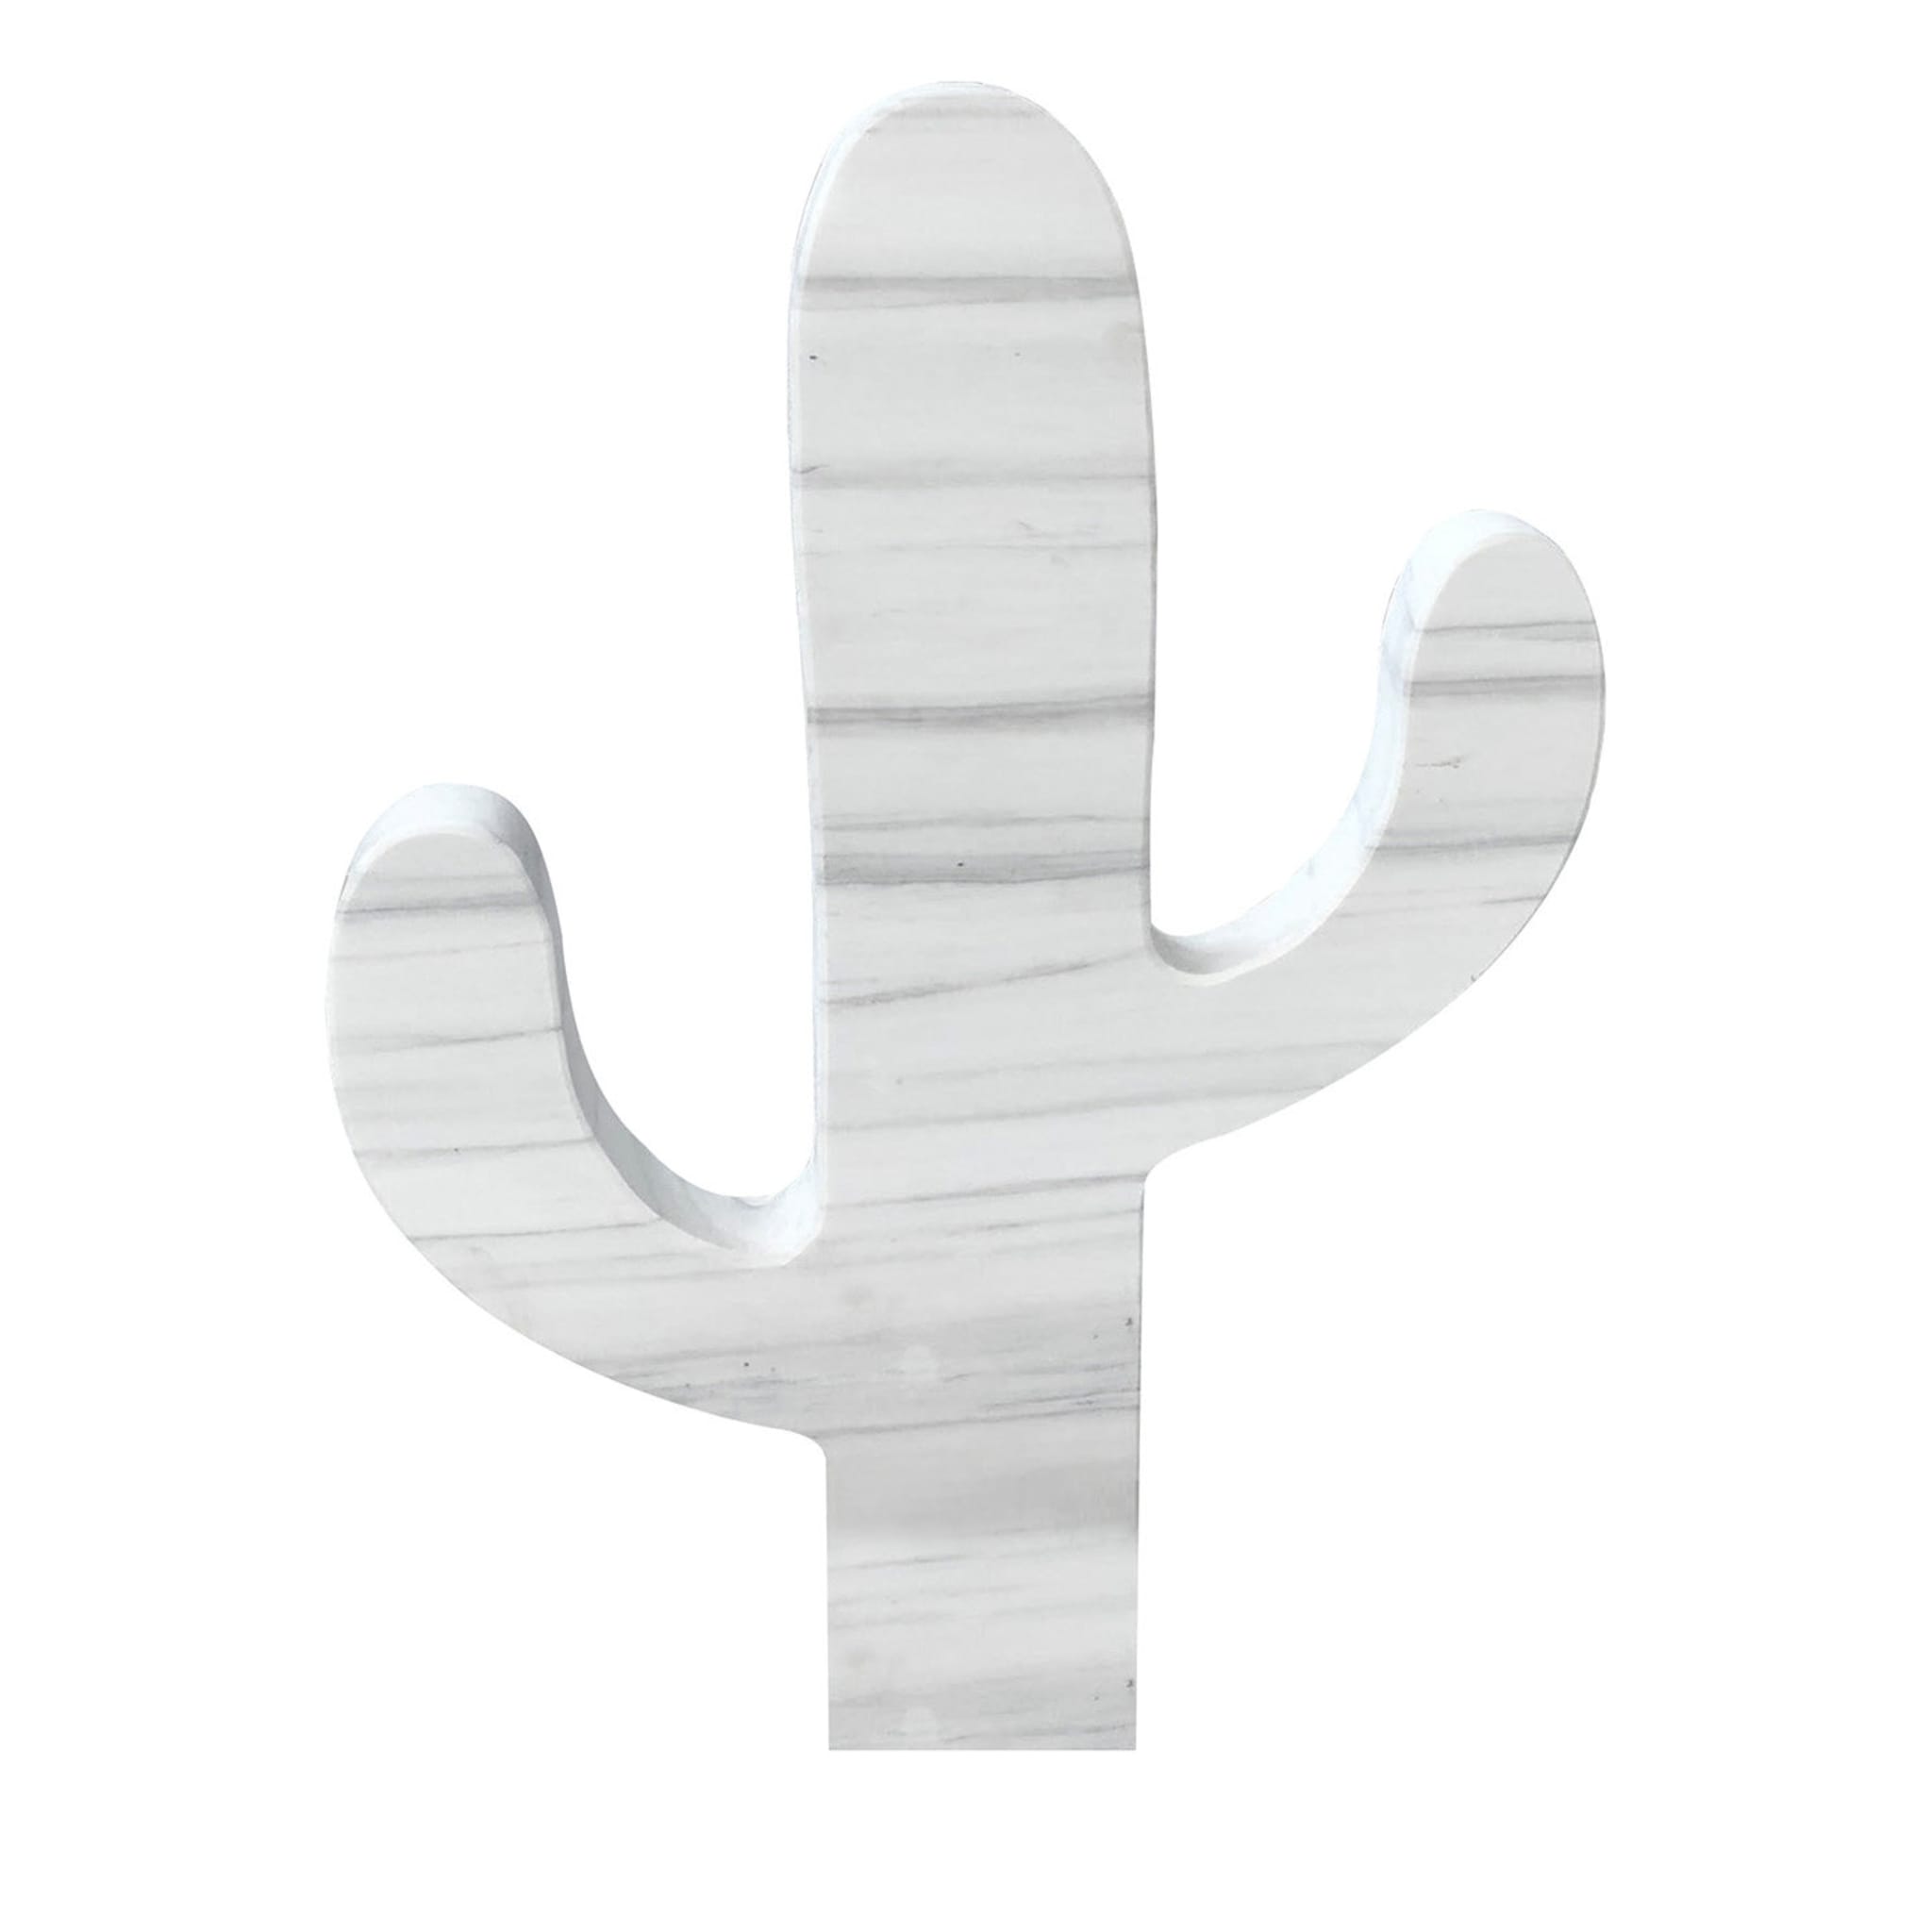 Paonazzo Carrara Marble Cactus Sculpture by Eugenio Biselli - Main view